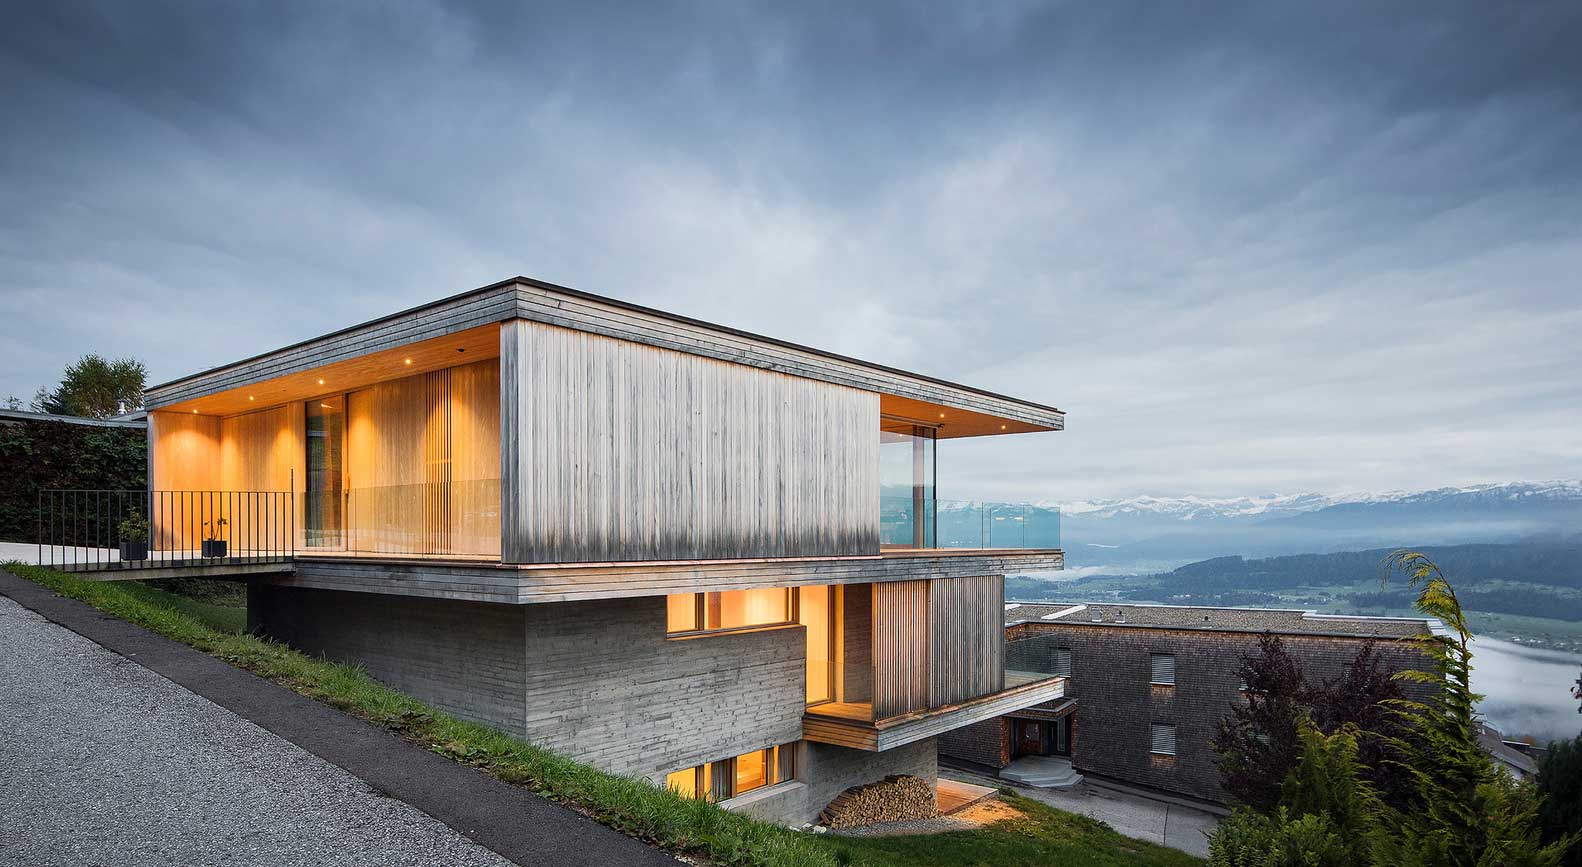 Simple and Beautiful Slope House • 333+ Images • [ArtFacade]